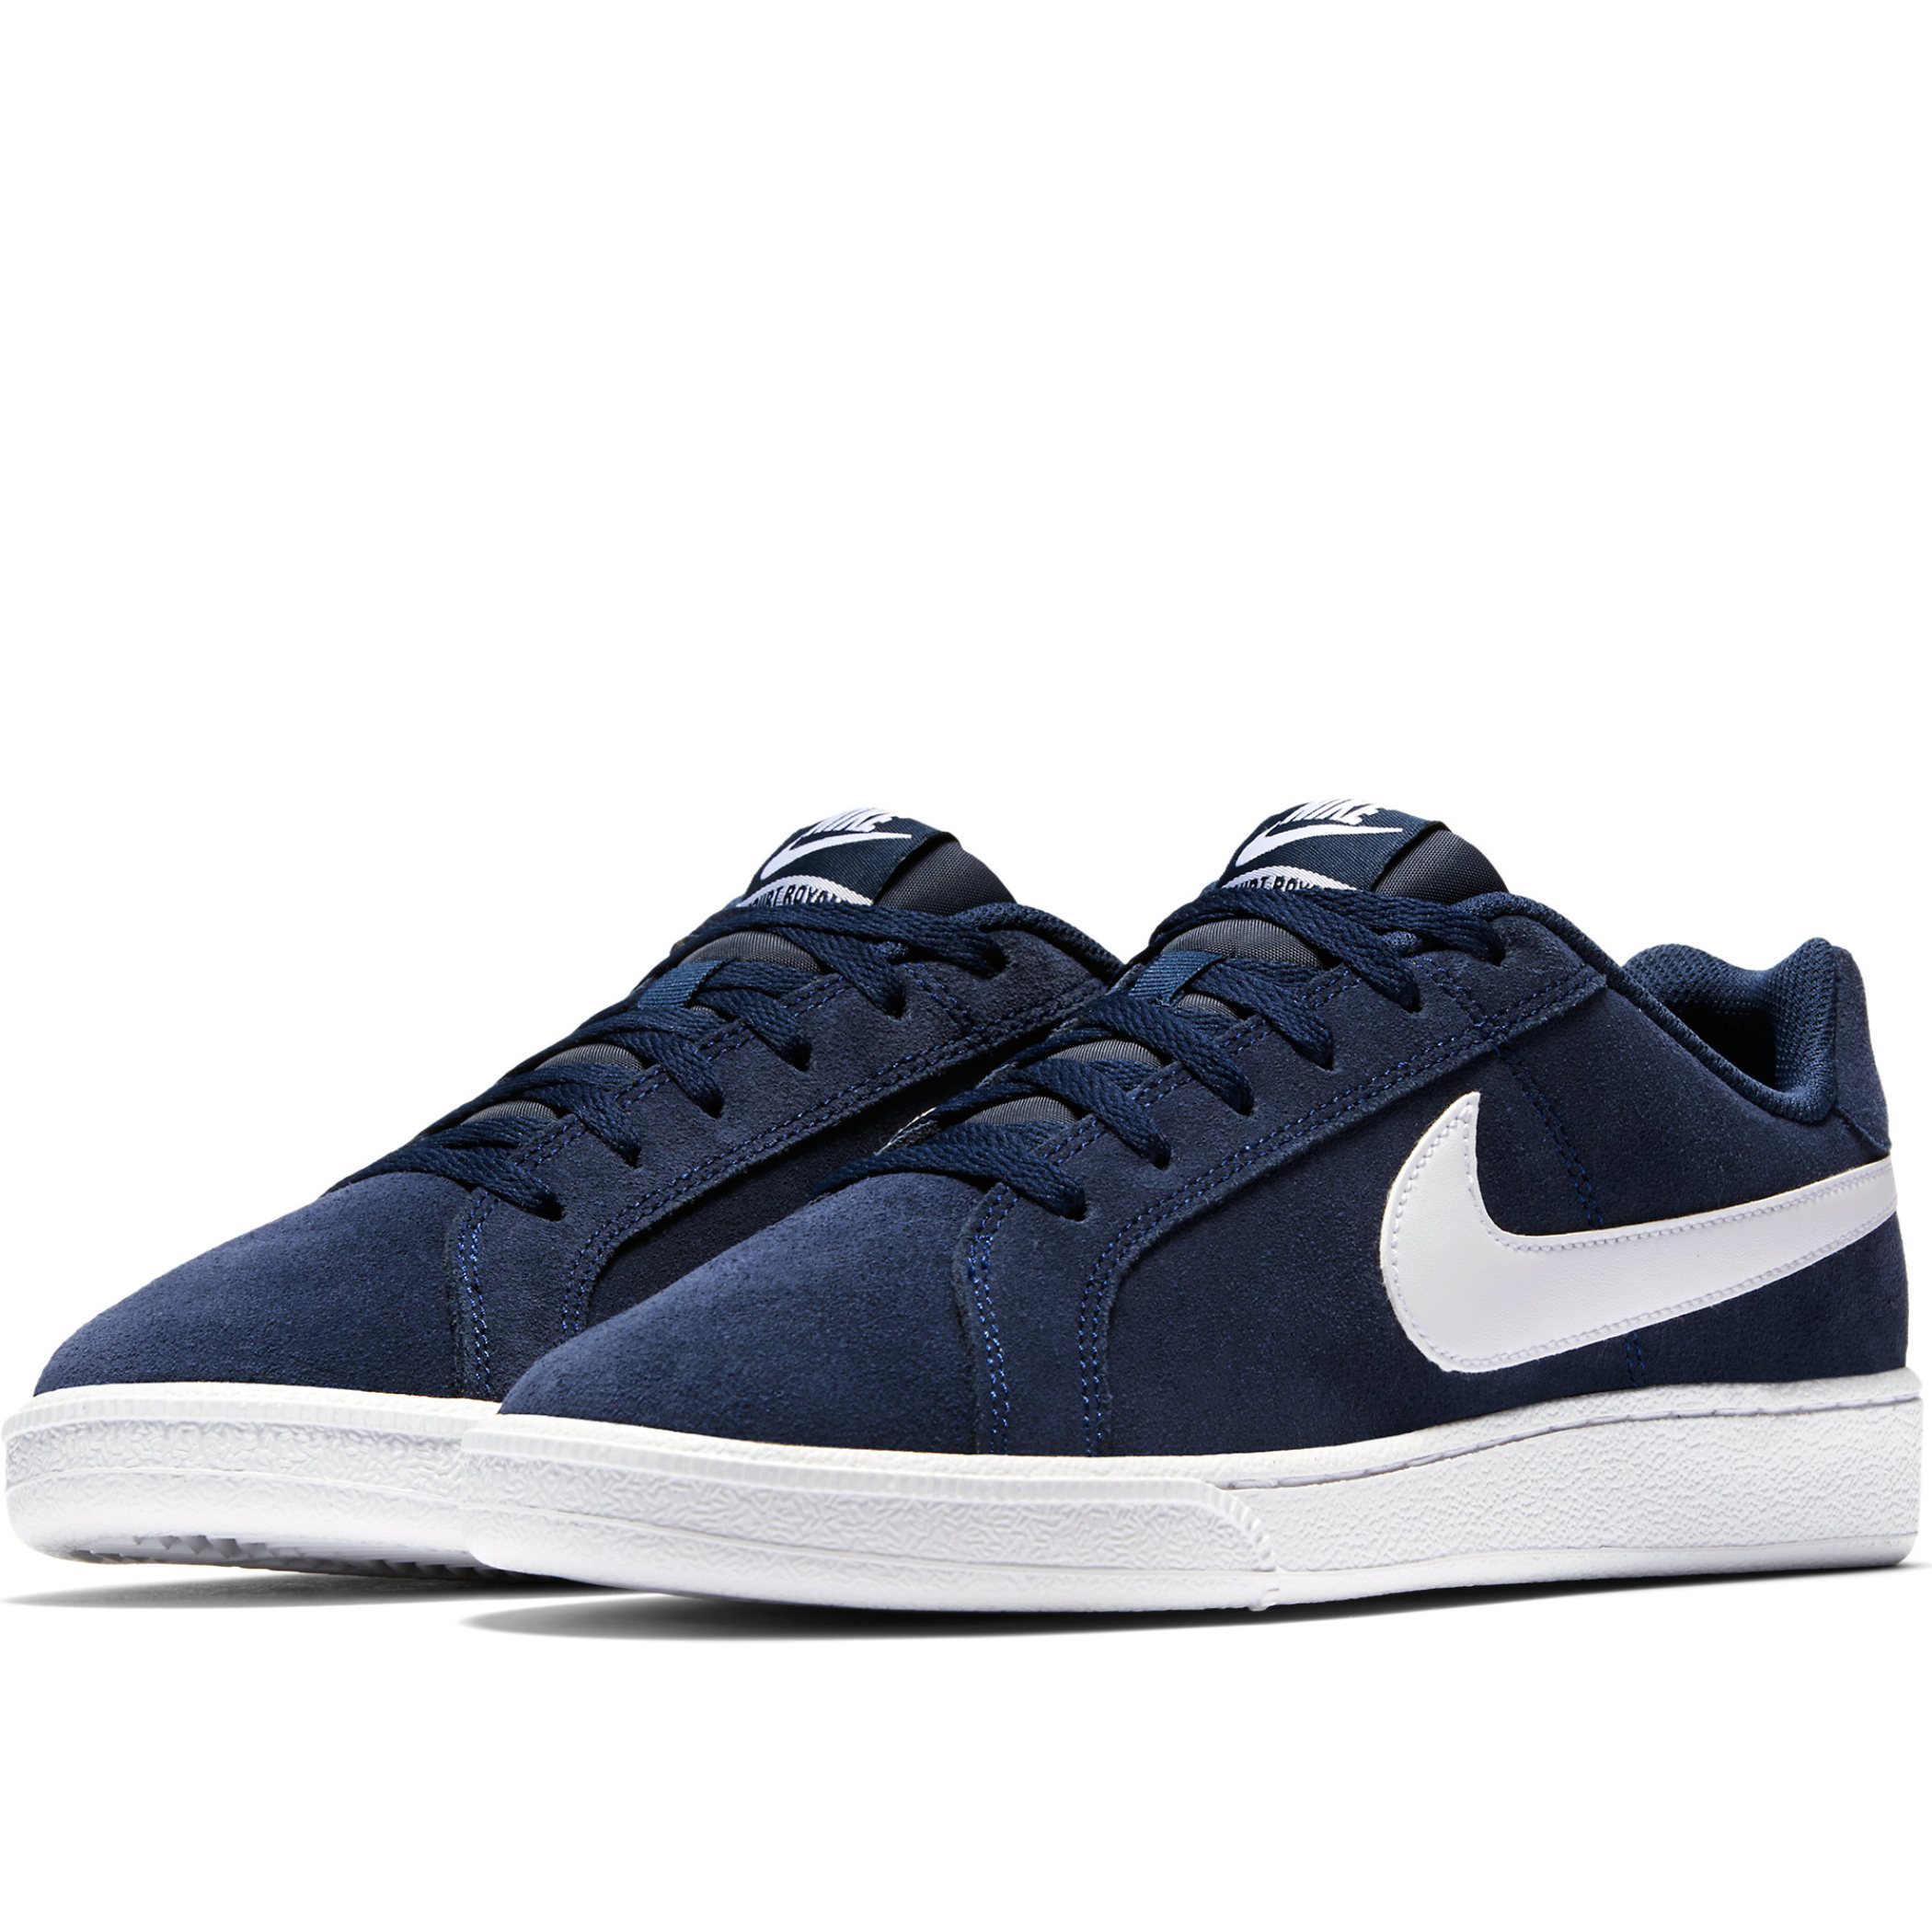 Nike Court Royale Suede 819802-410 